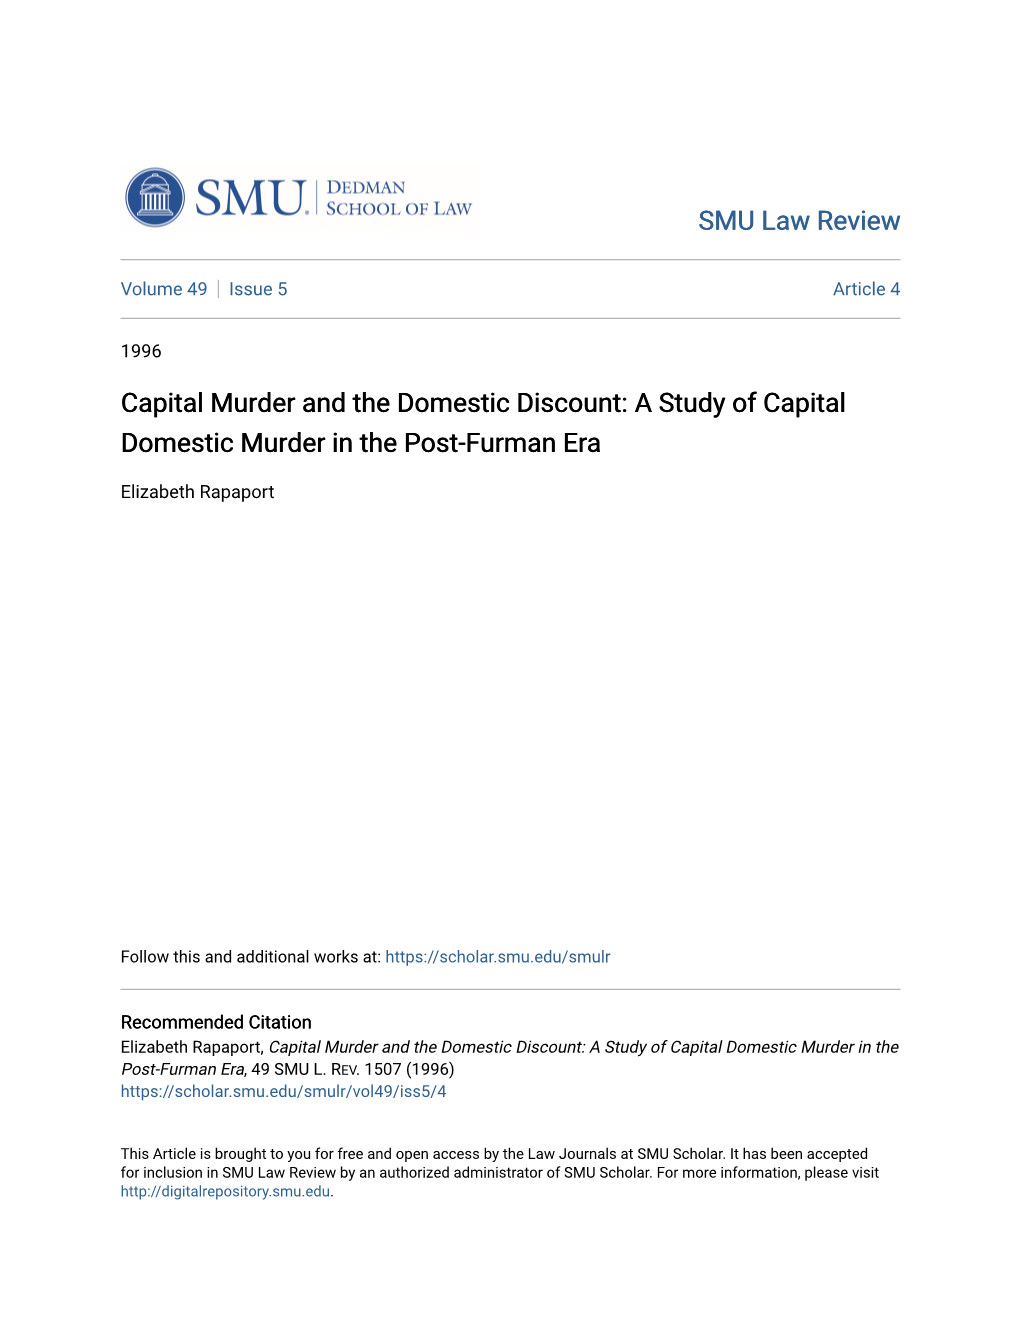 Capital Murder and the Domestic Discount: a Study of Capital Domestic Murder in the Post-Furman Era